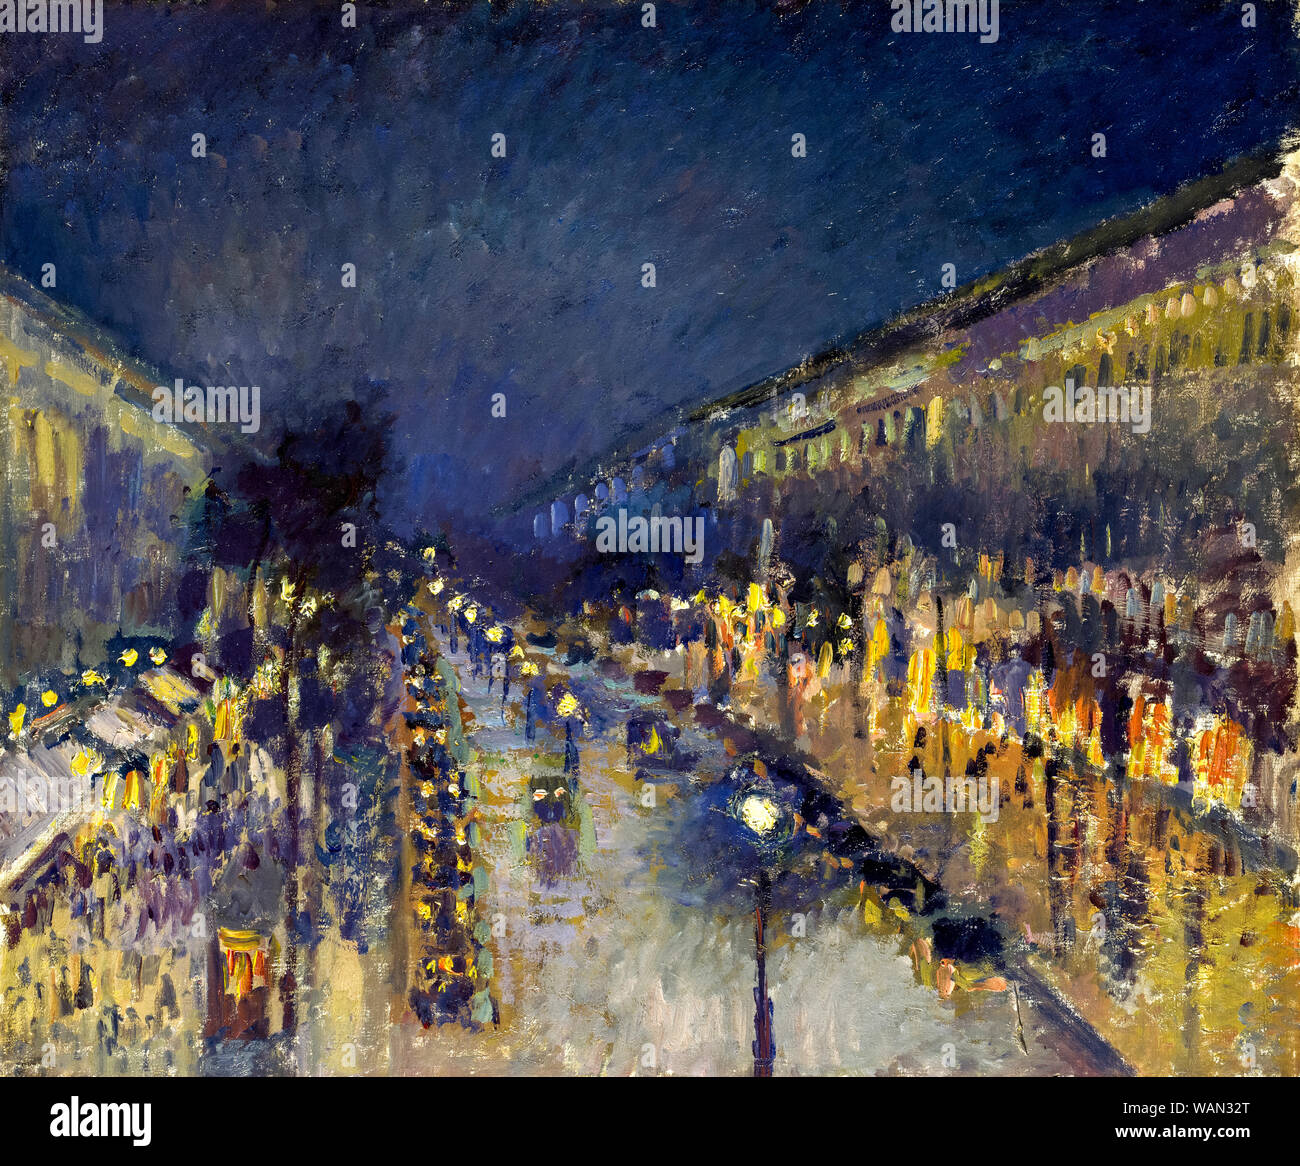 Pissarro. Painting titled 'The Boulevard Montmartre at Night' by Camille Pissarro, 1897 Stock Photo